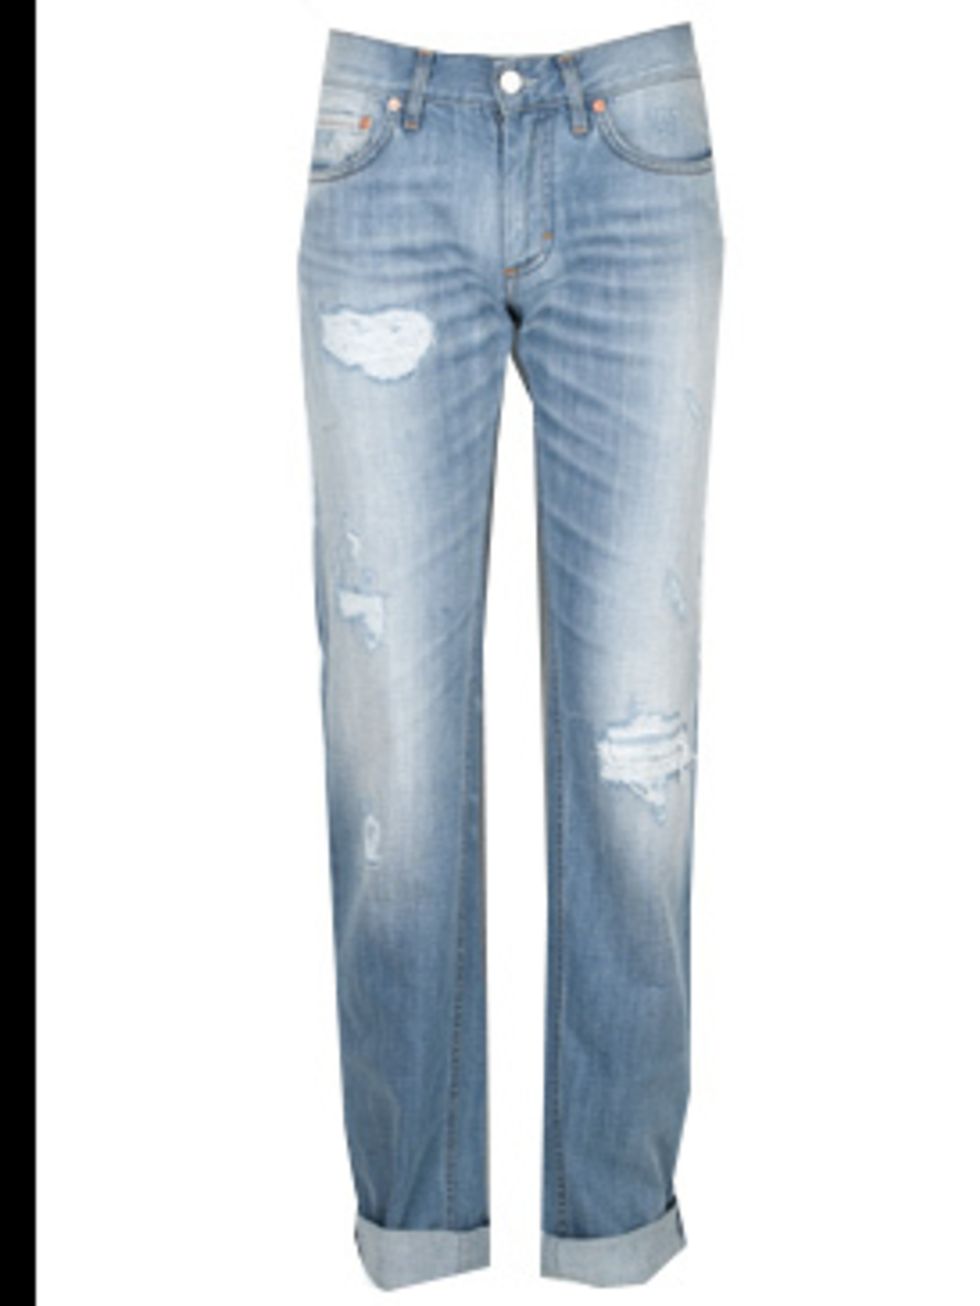 <p>Jeans, £240.00 by Acne. For availability check <a href="http://www.asos.com/Woman/">ASOS</a></p>